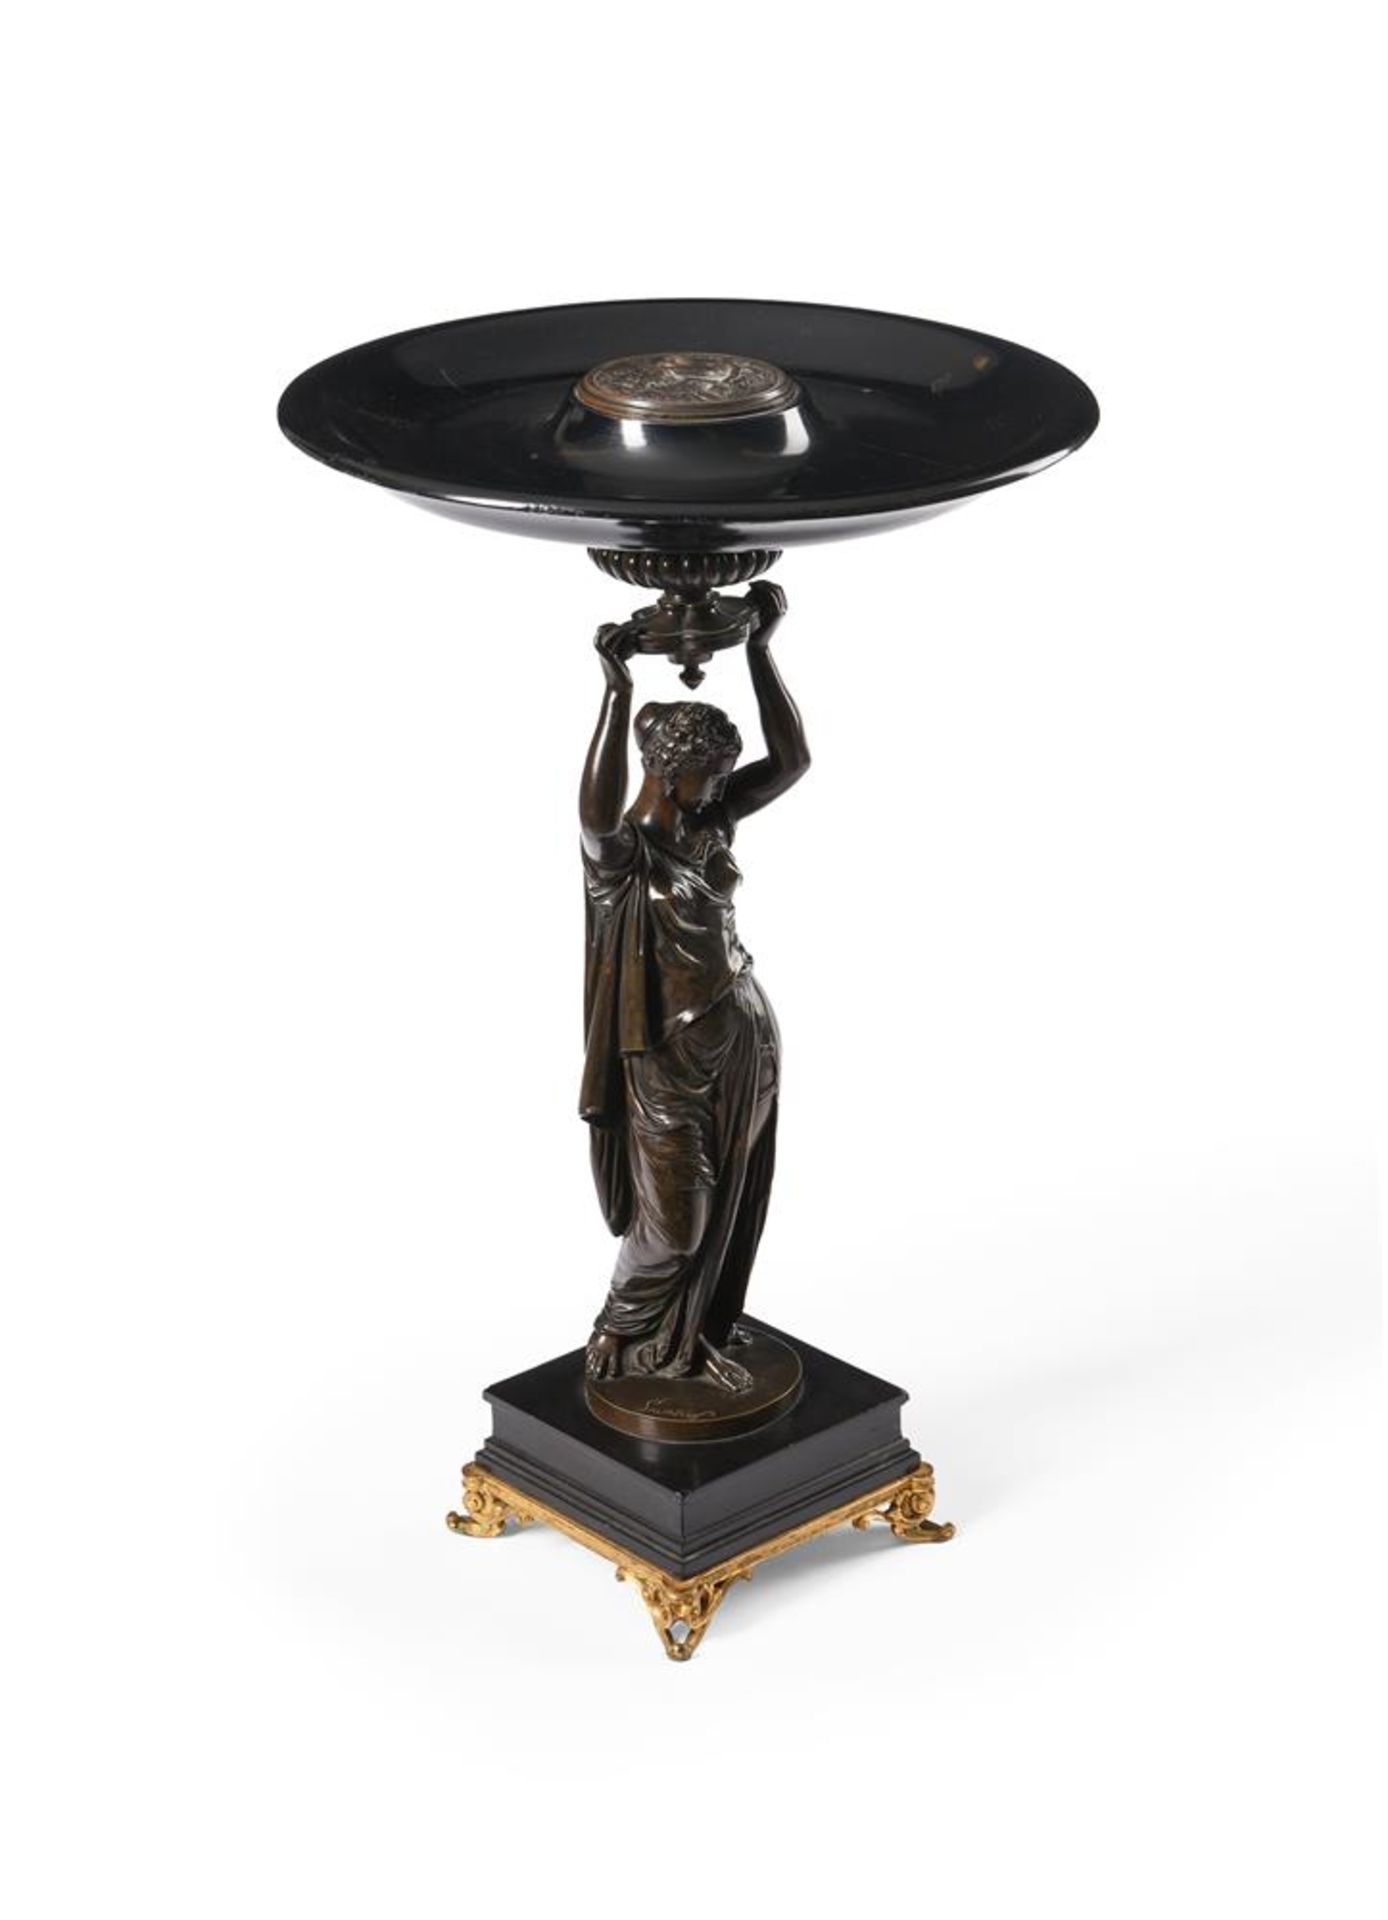 AFTER JEAN JULOT SALMSON (FRENCH 1823-1902), A BRONZE TAZZA, 19TH CENTURY